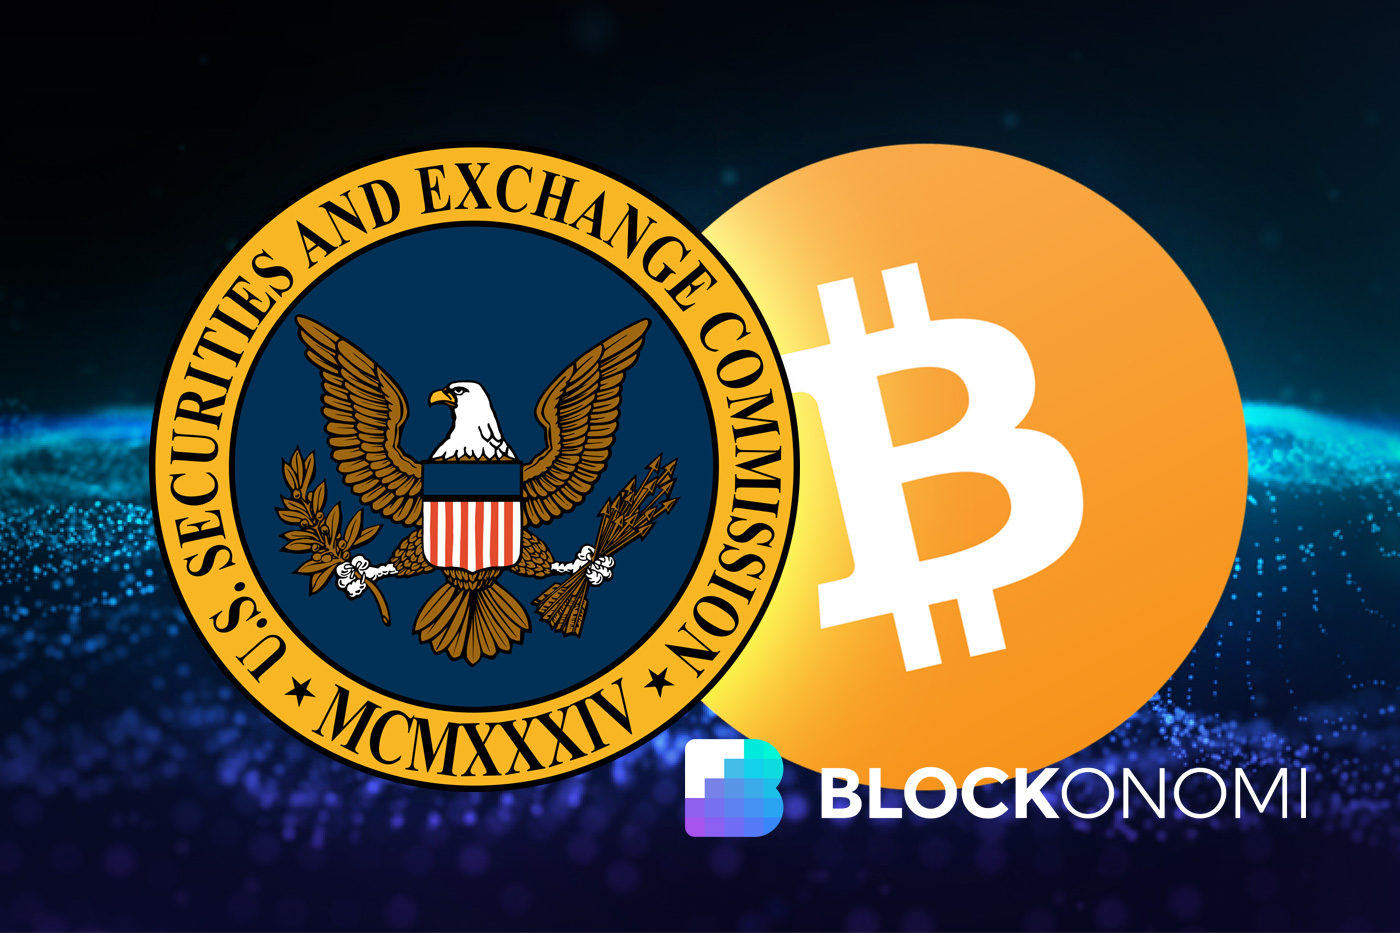 sec and bitcoin